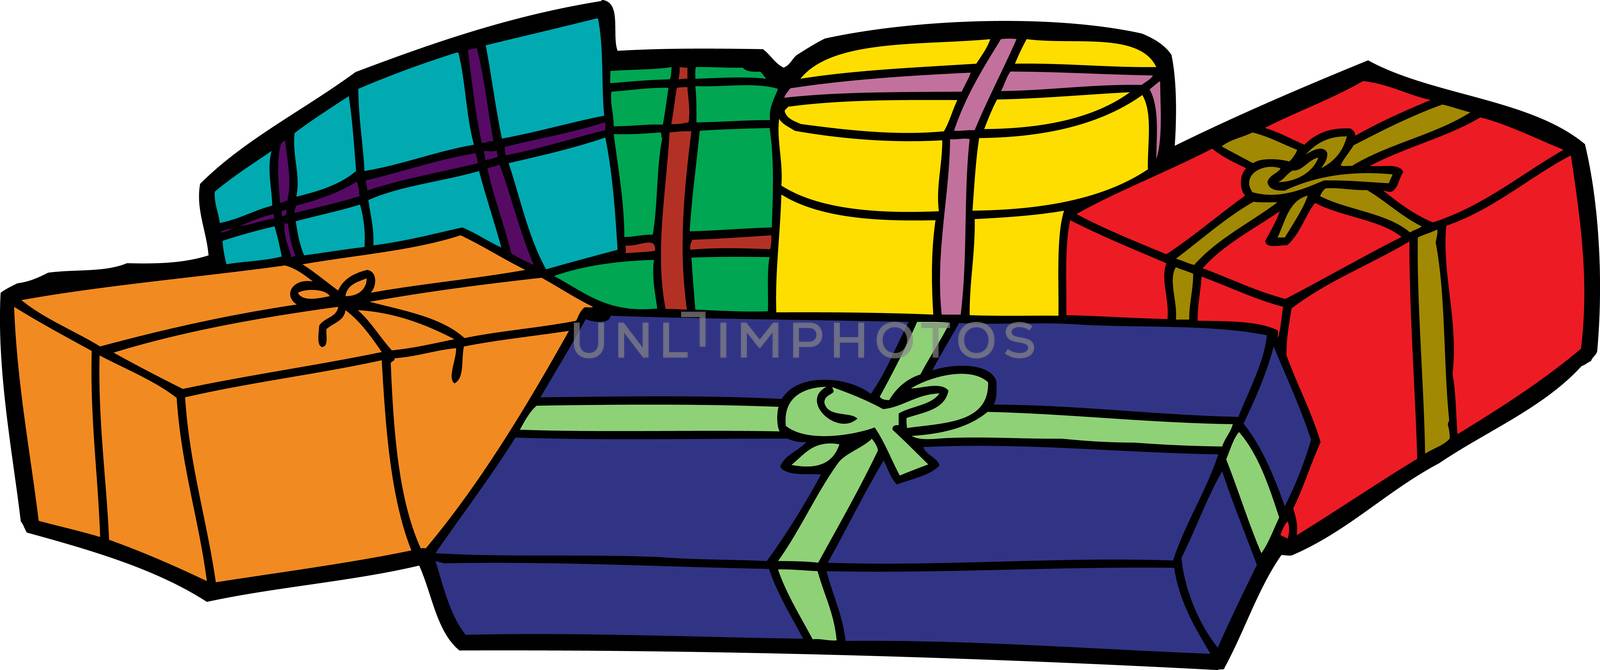 Isolated pile of gift boxes over white background